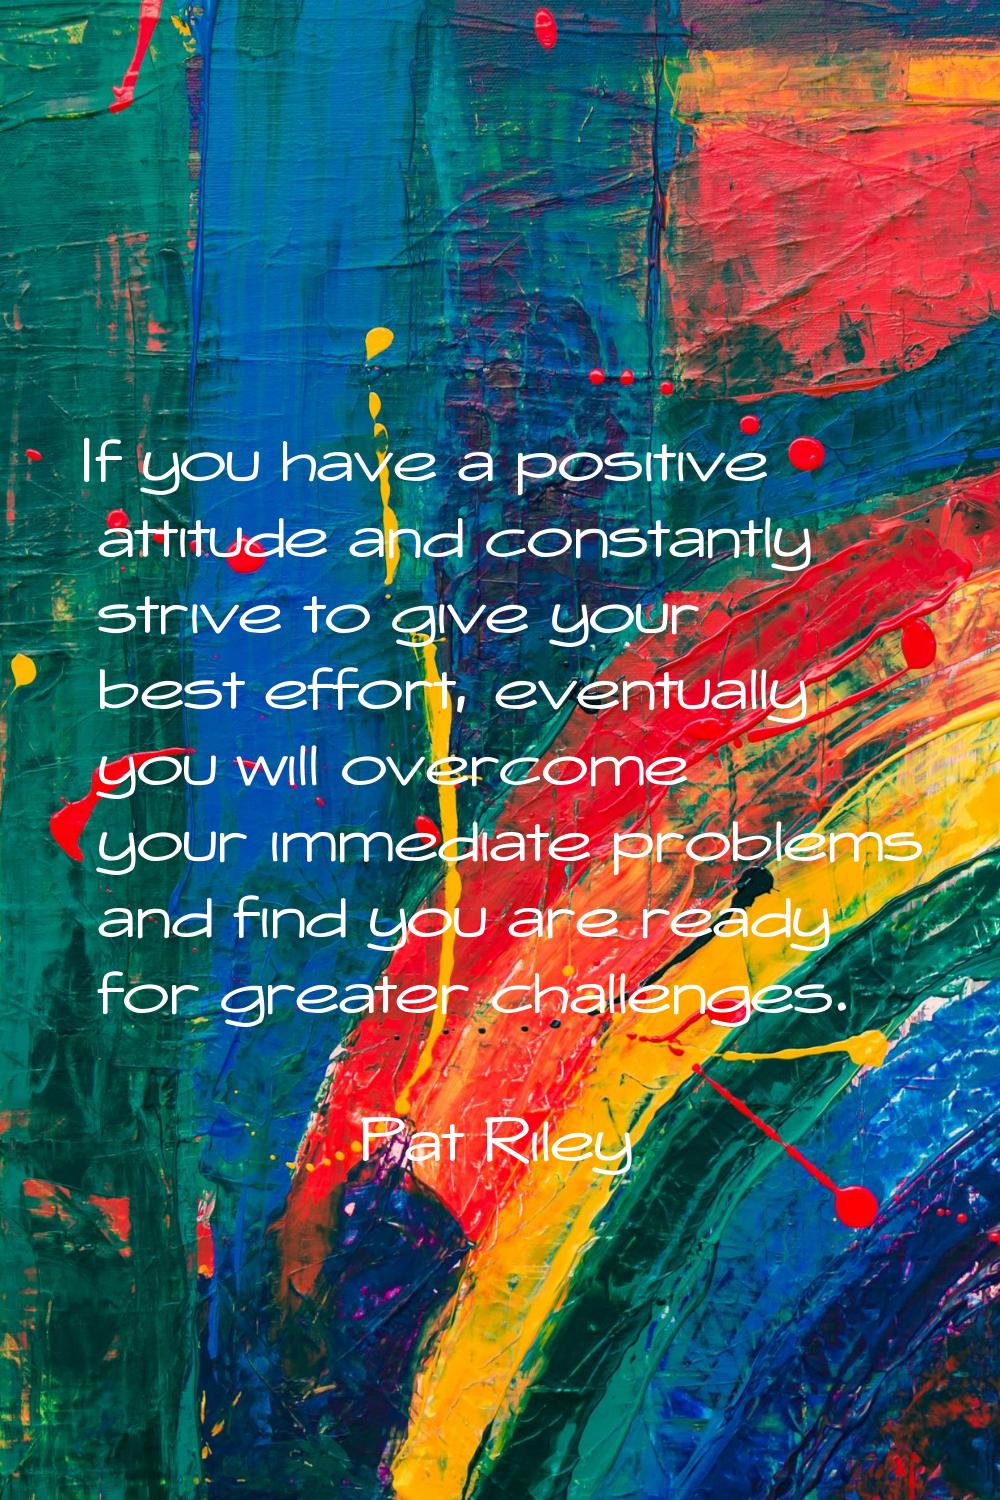 If you have a positive attitude and constantly strive to give your best effort, eventually you will